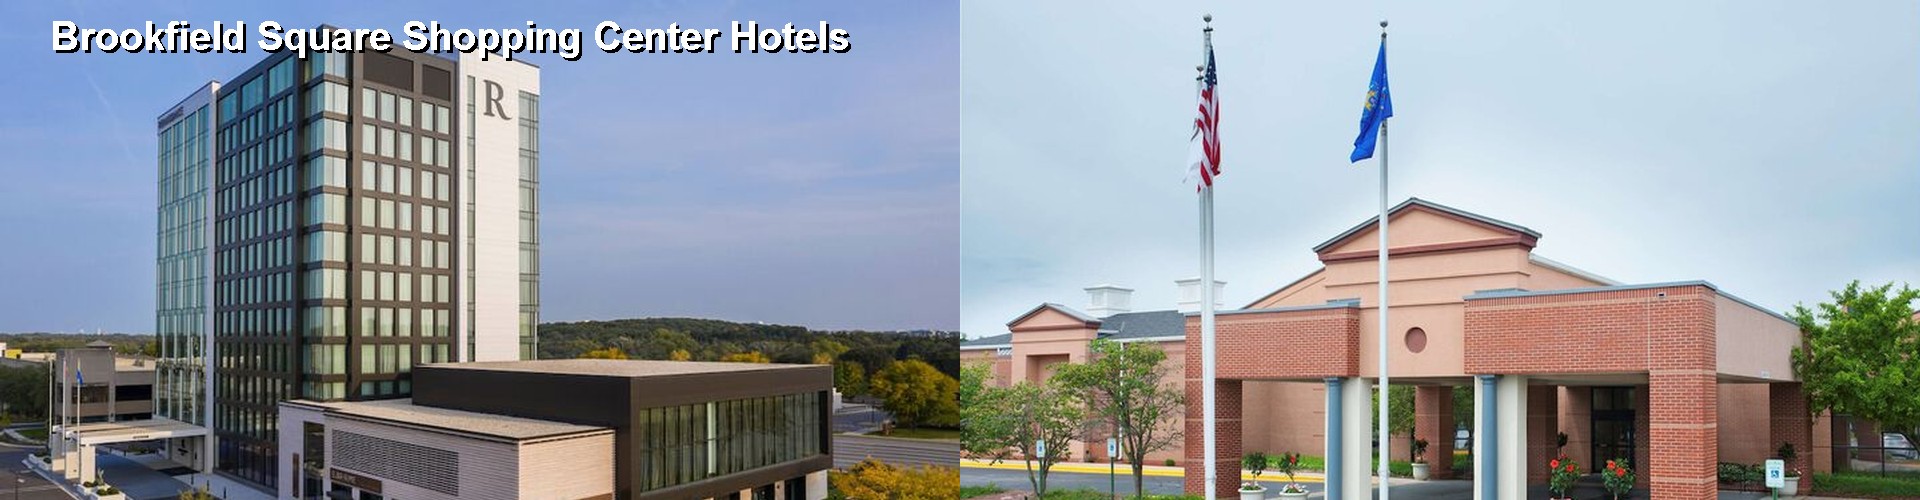 3 Best Hotels near Brookfield Square Shopping Center